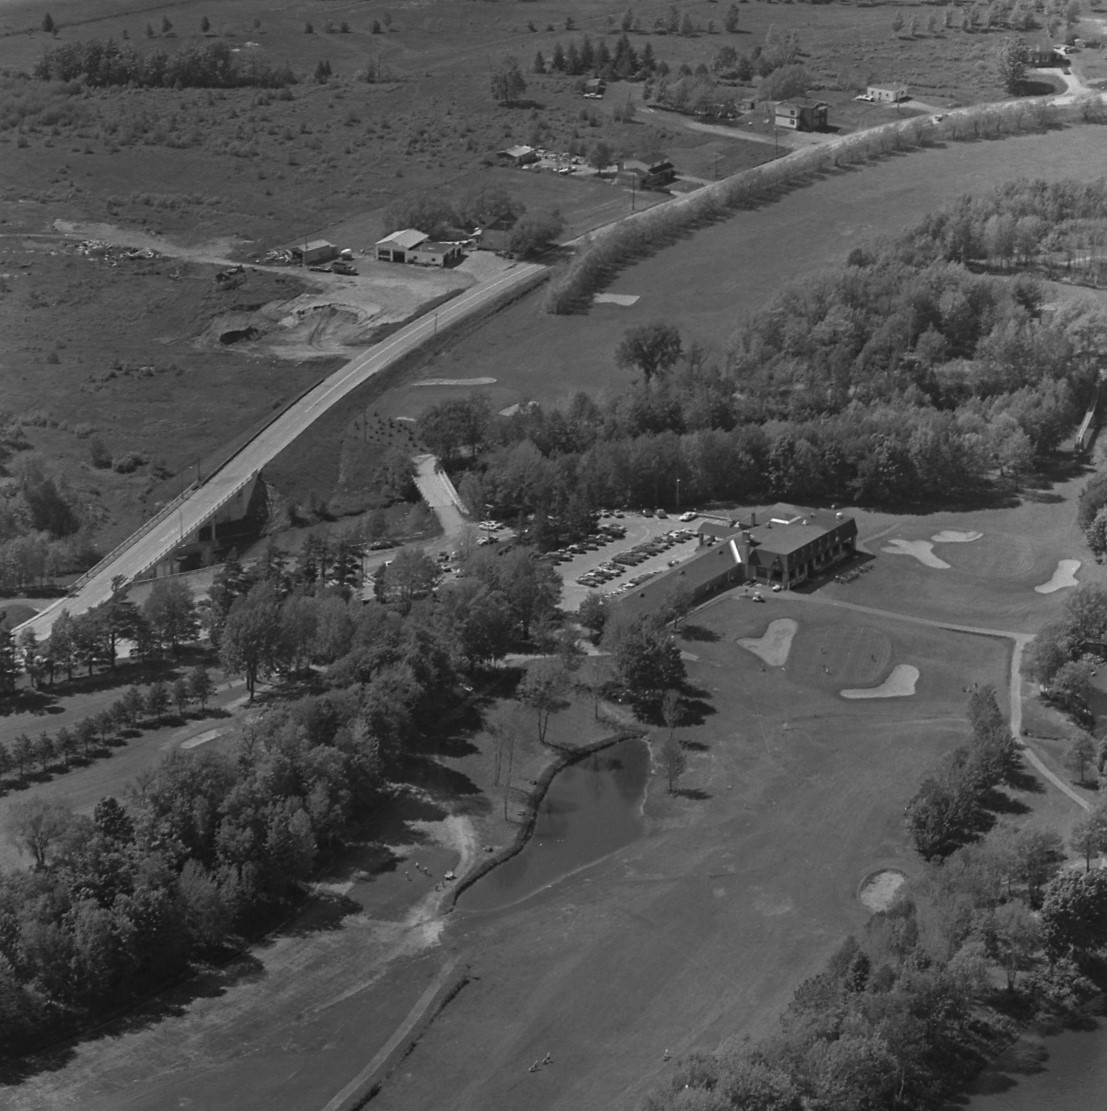 Black and white photograph showing an aerial view of the golf course. It shows the main clubhouse and several sand traps on the course.